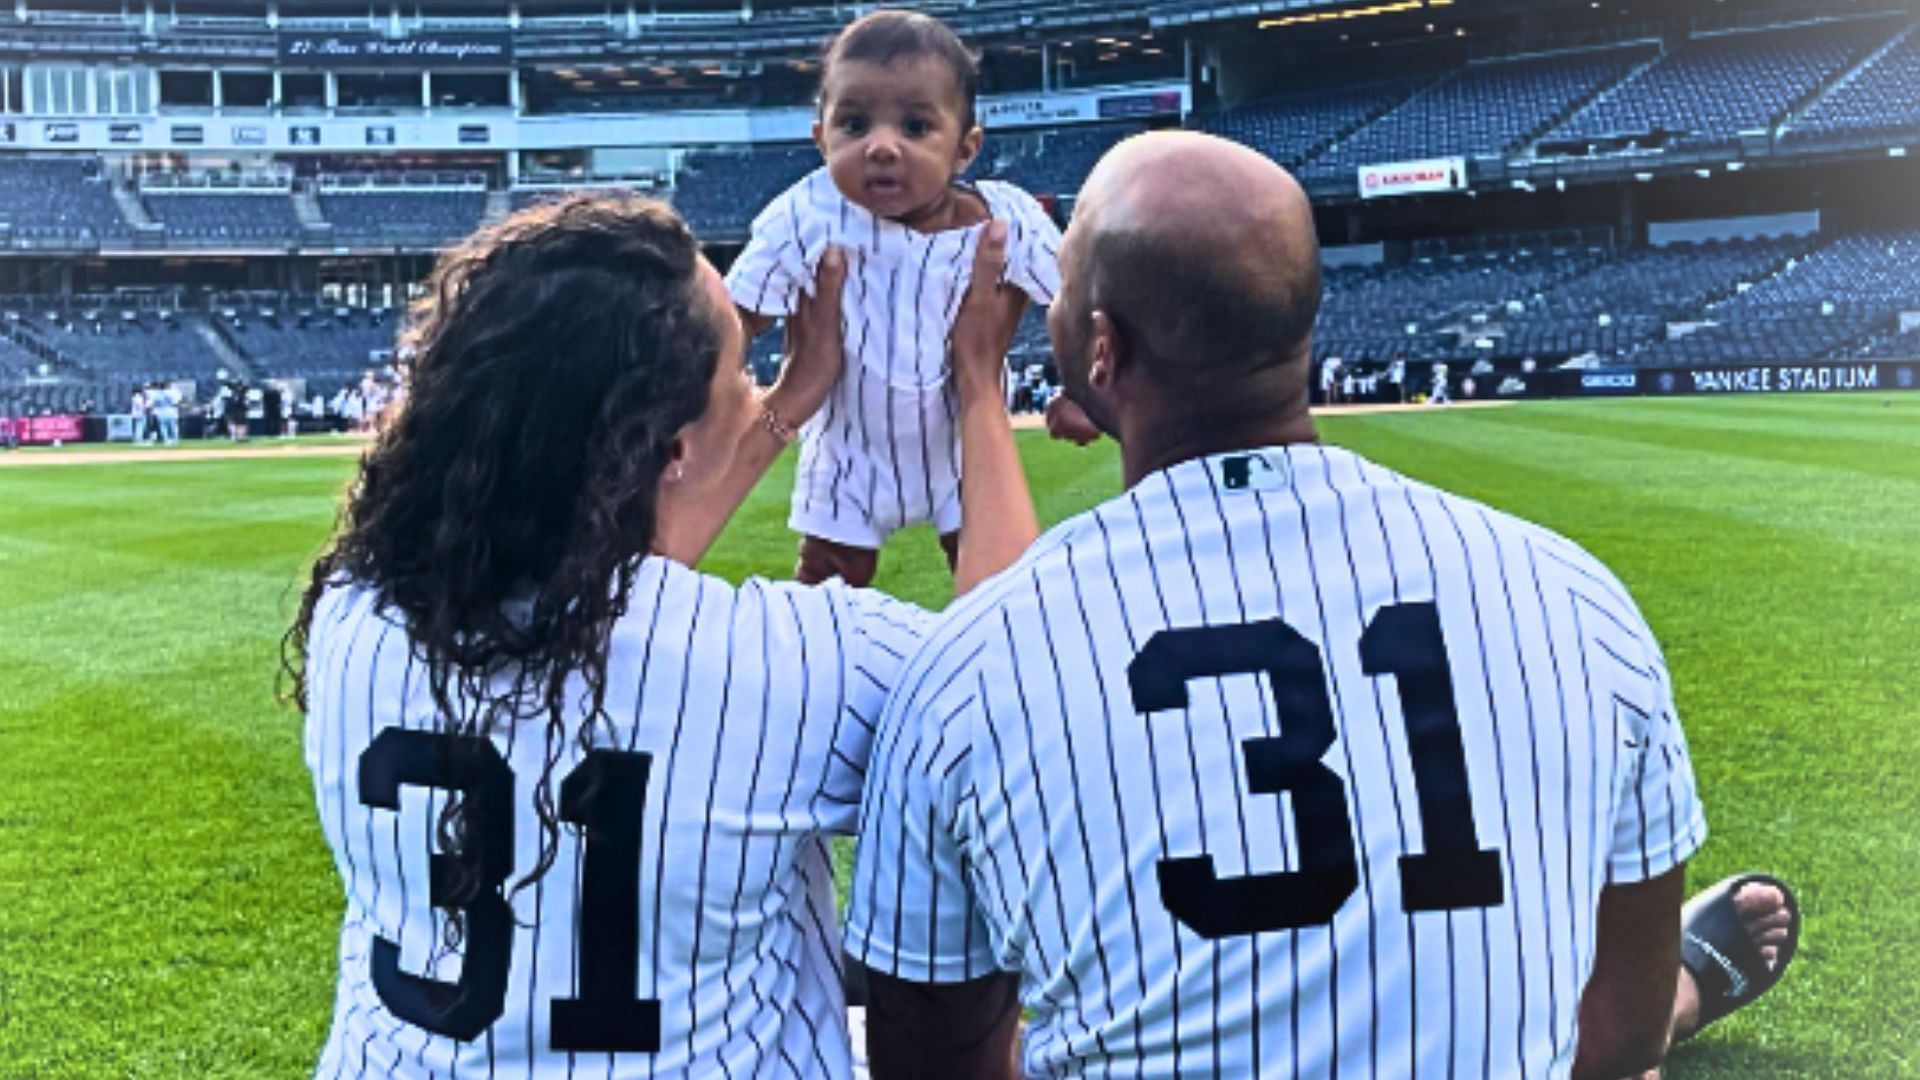 Who is Aaron Hicks' wife, Cheyenne Woods? A glimpse into the